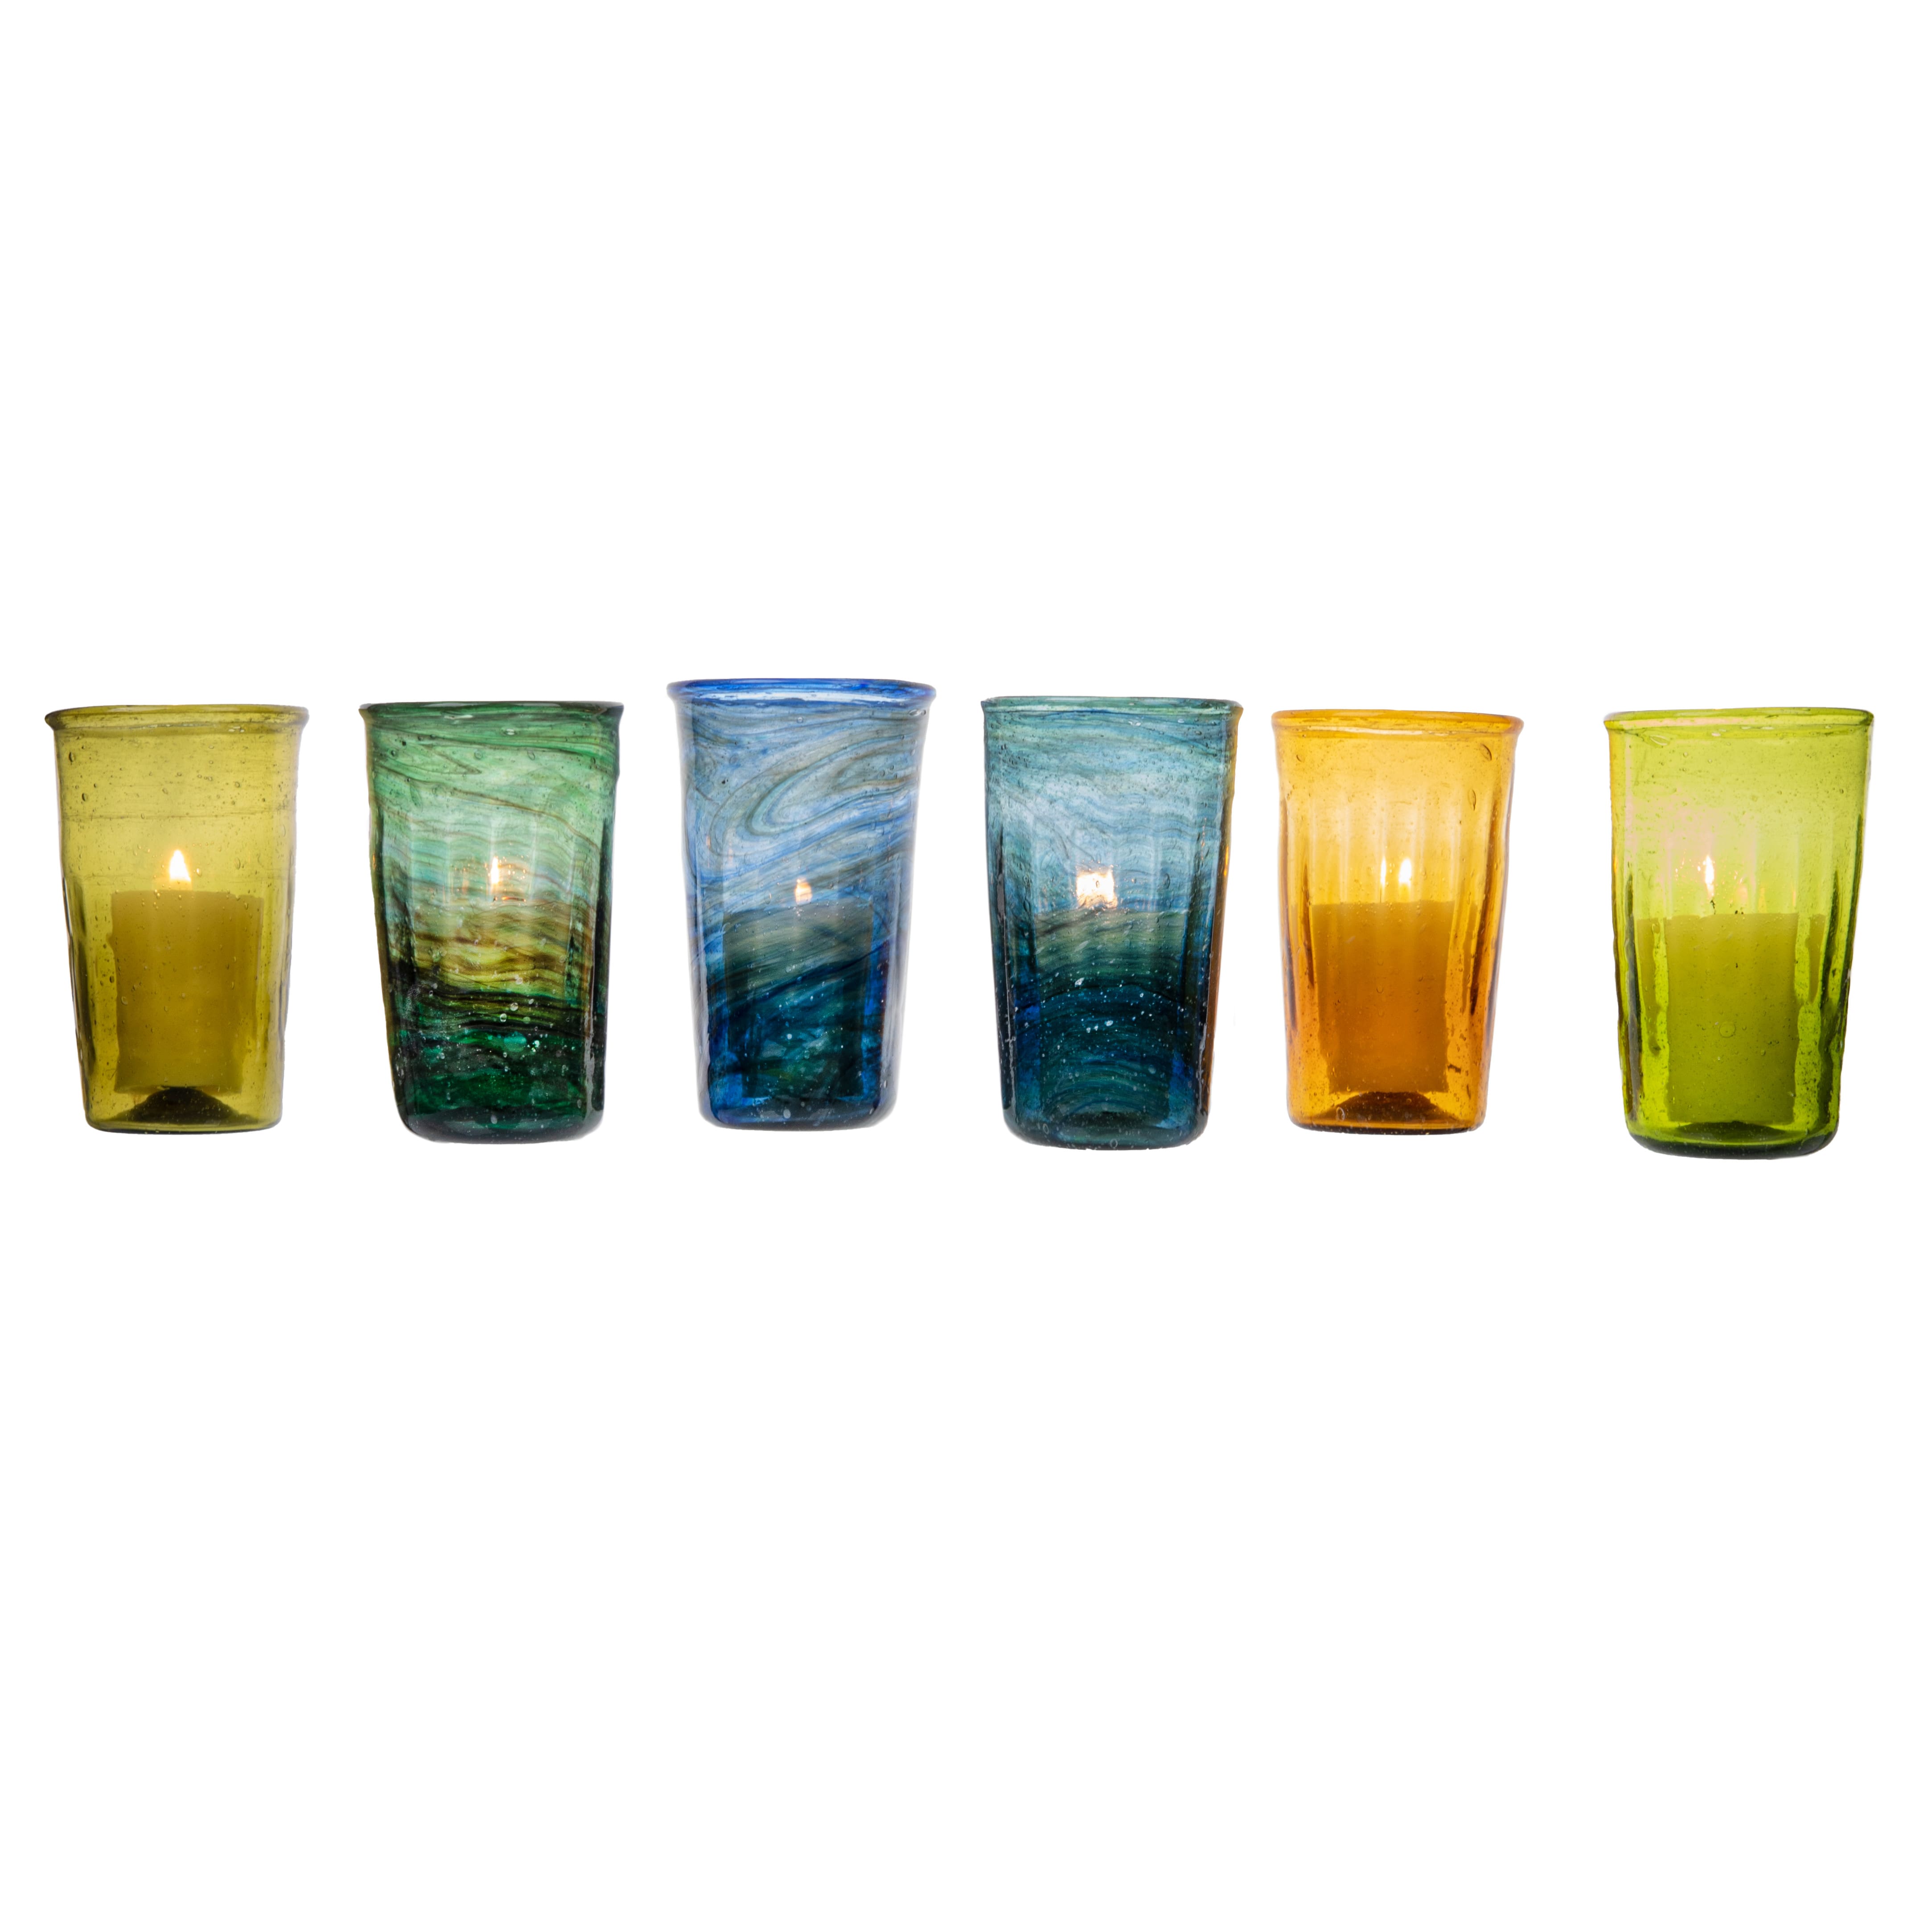 RAKLE Drinking Glasses Set of 4 – Colorful Glass Cups